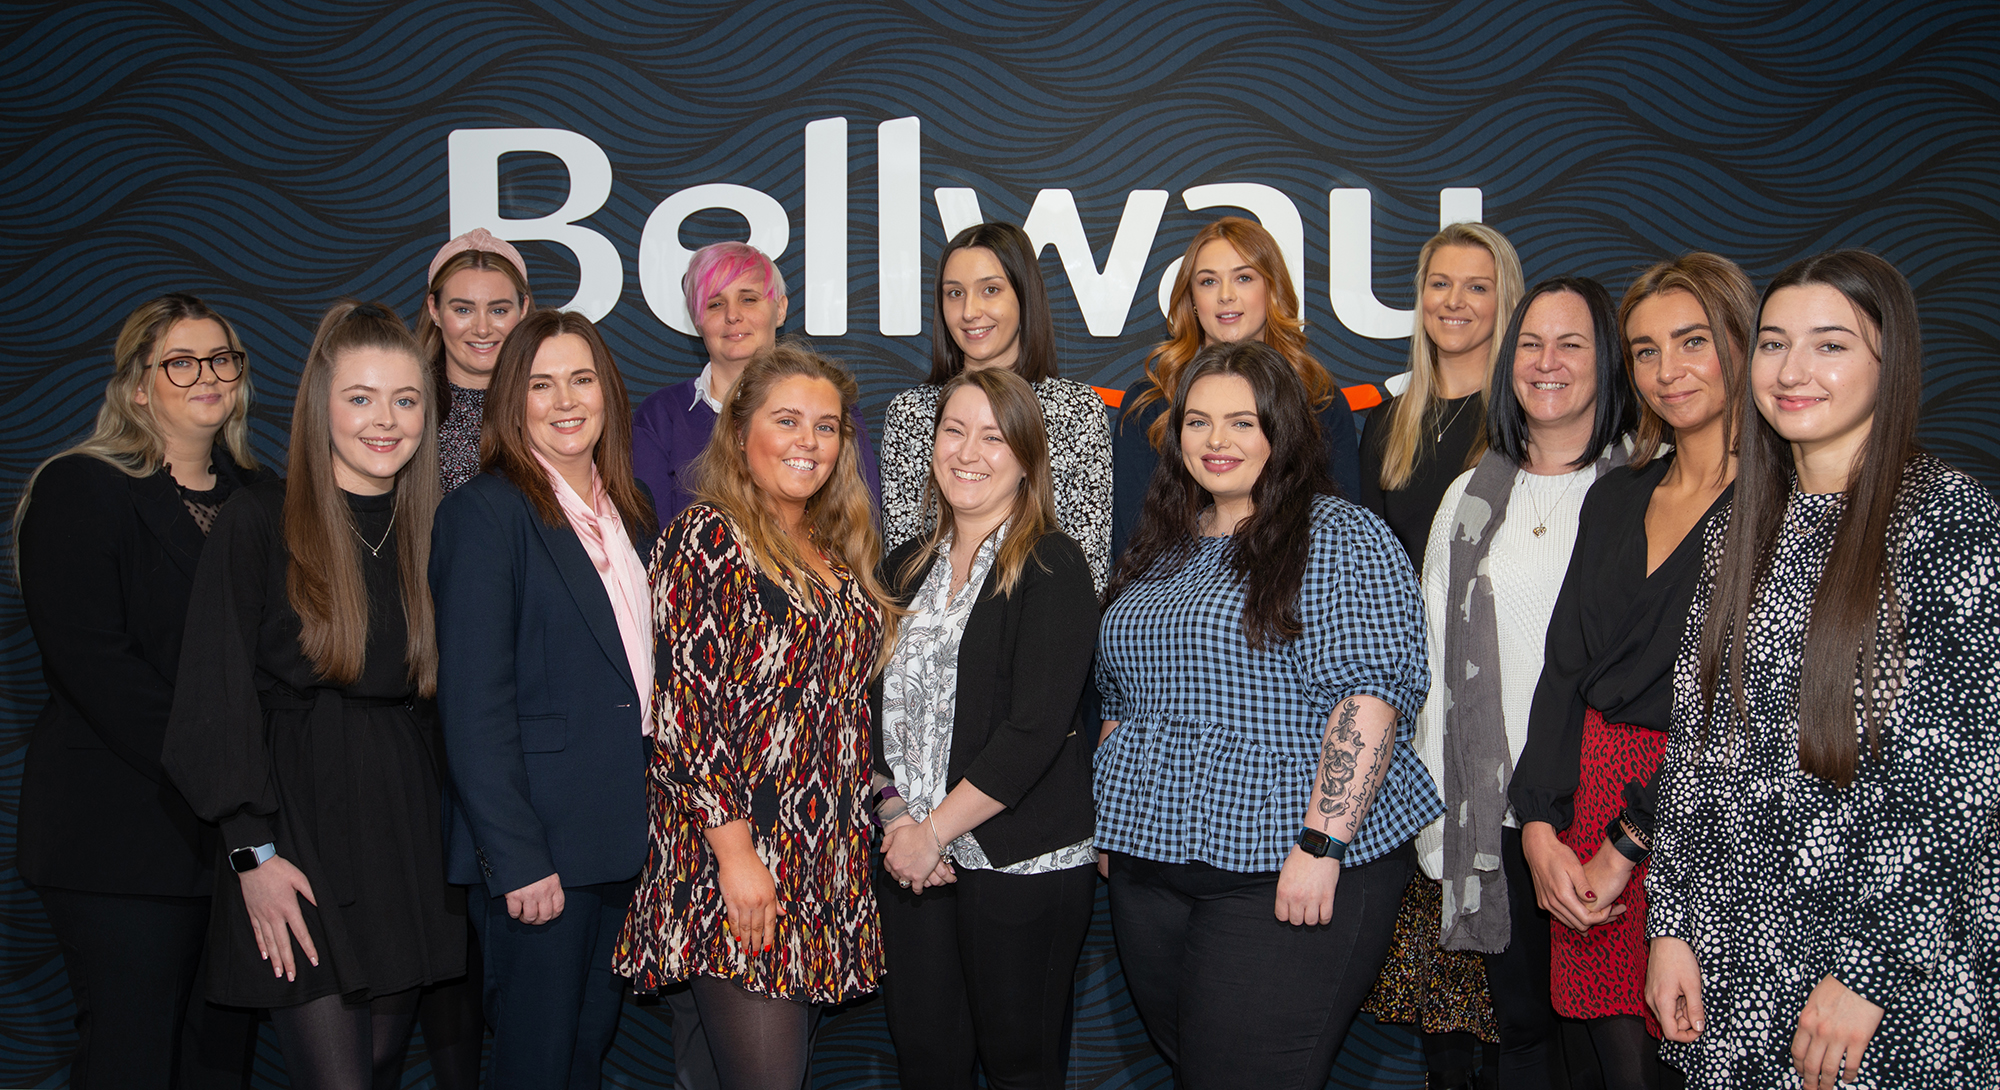 20% INCREASE IN WOMEN BUILDING CAREERS WITH BELLWAY NORTH WEST